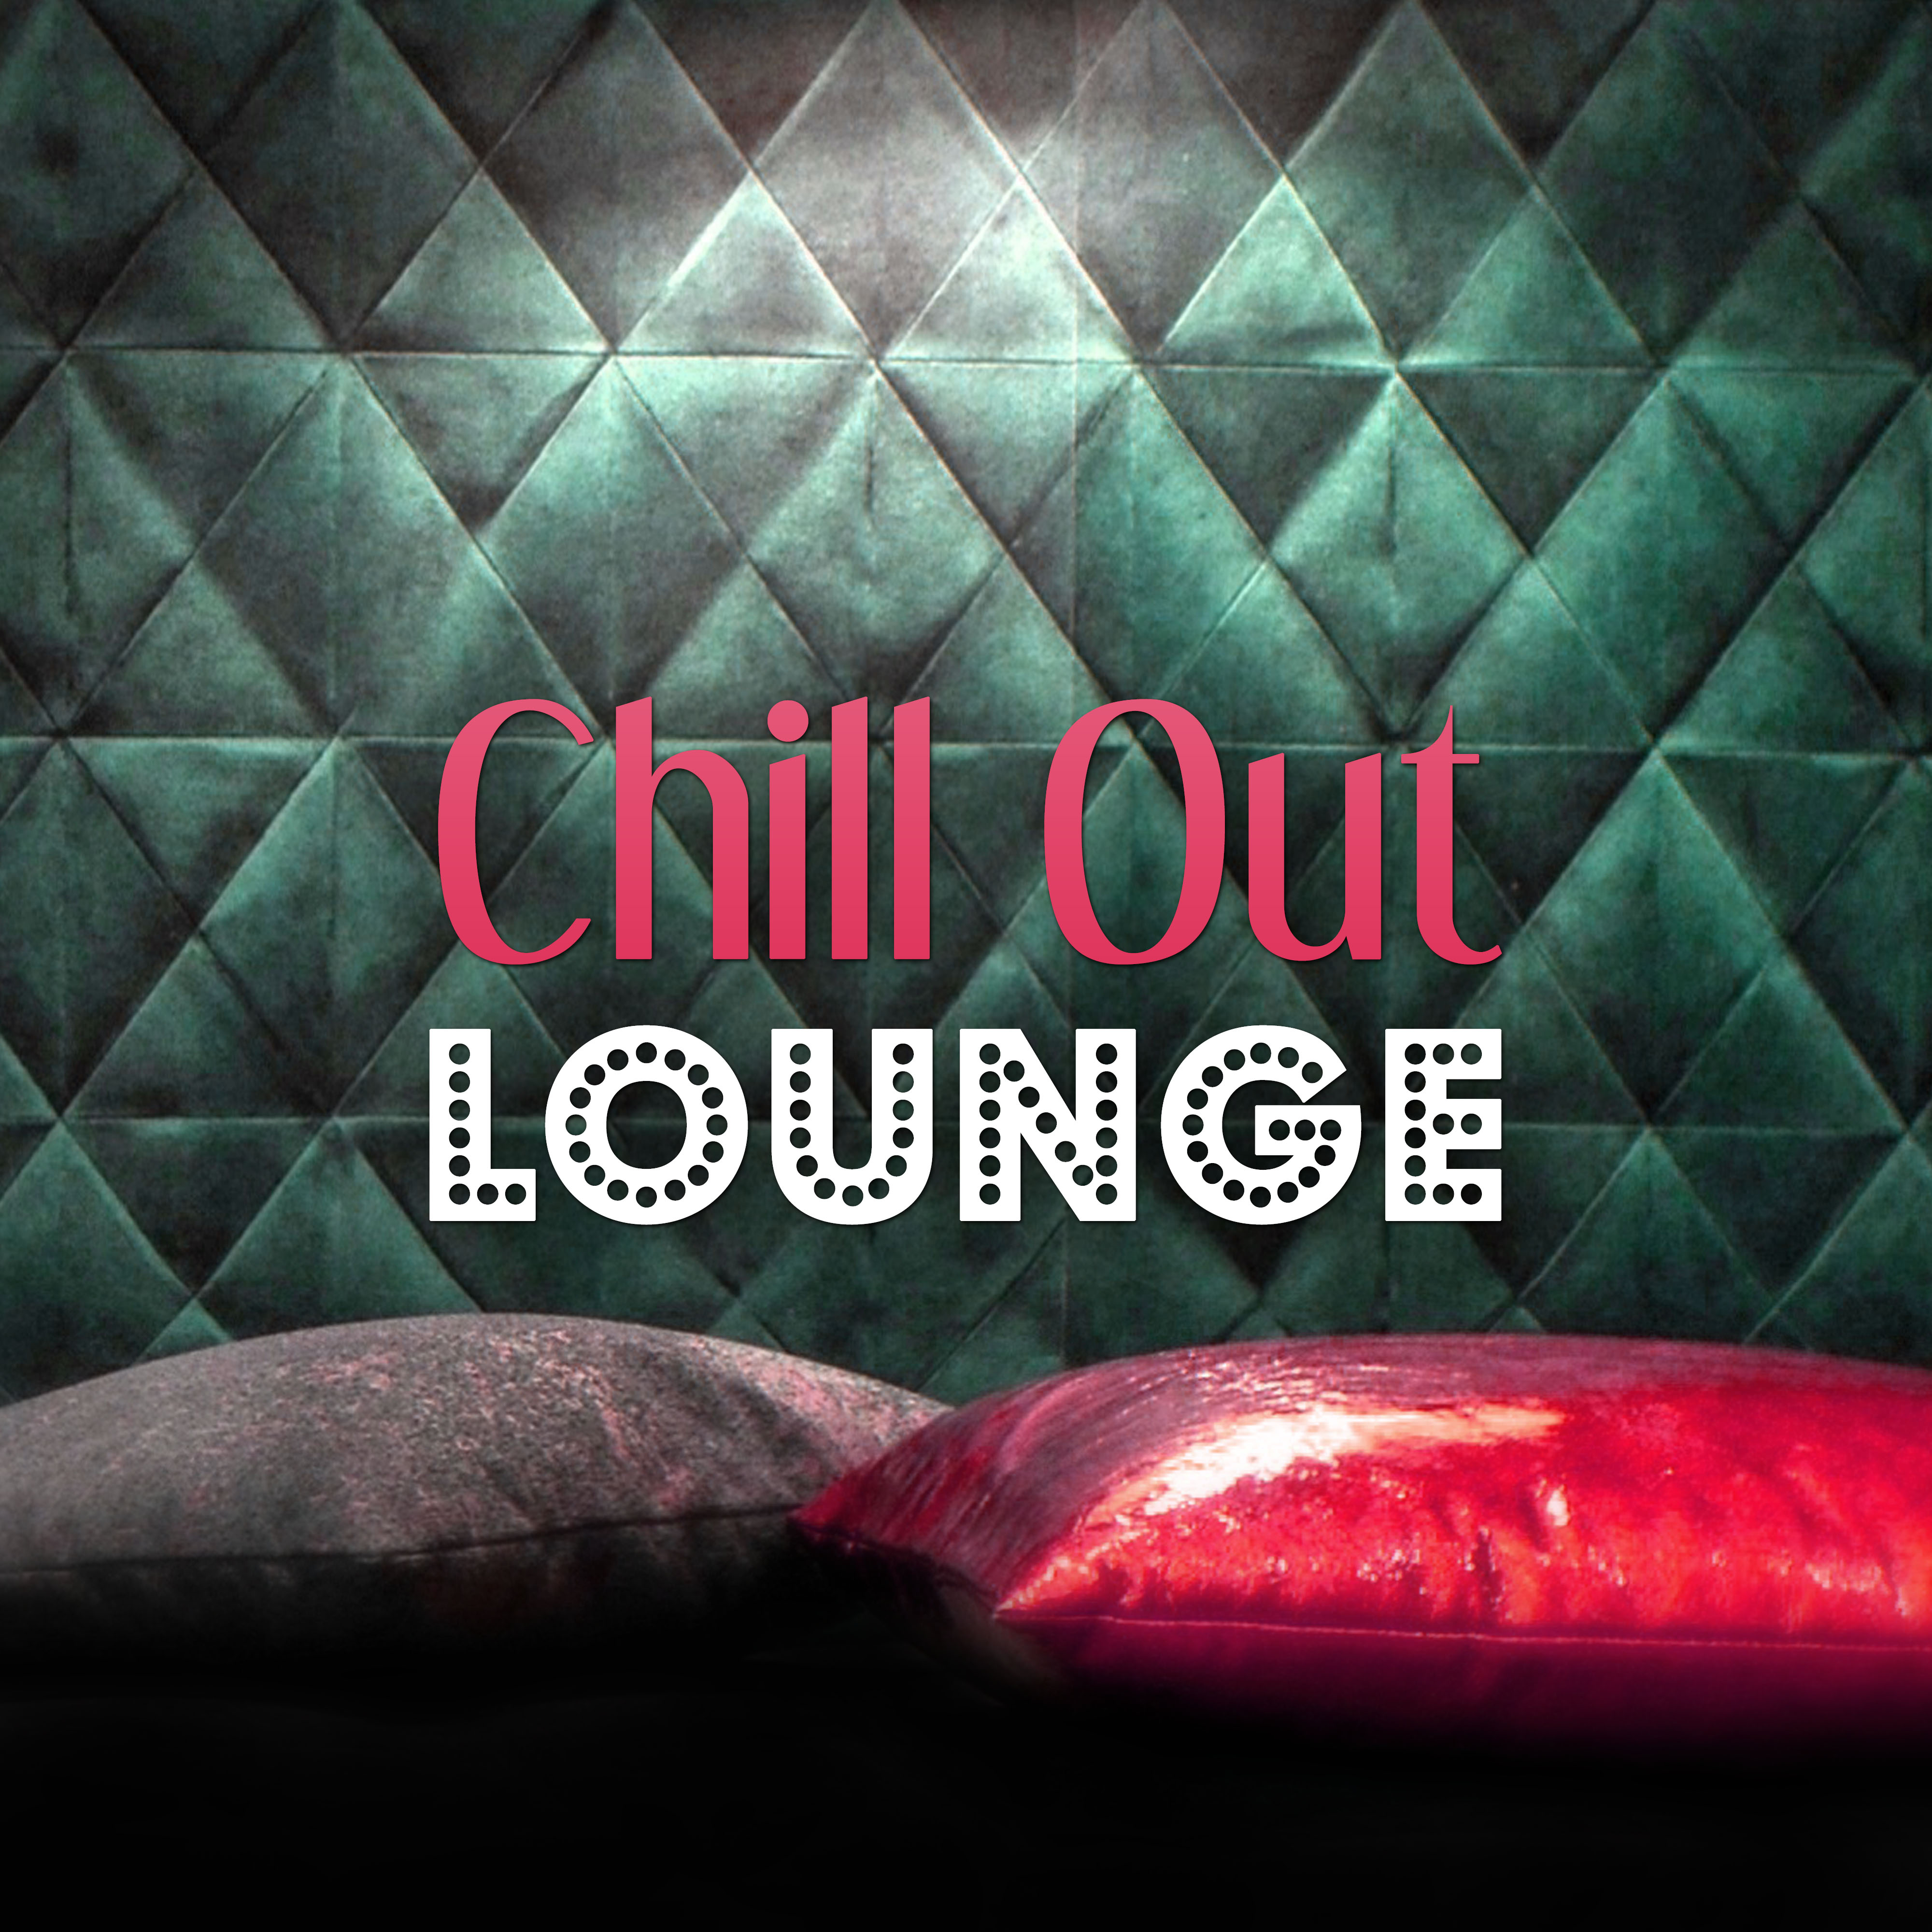 Chill Out Lounge  Born to Chill, Kos Lounge, Chill Out Music, Beach Party